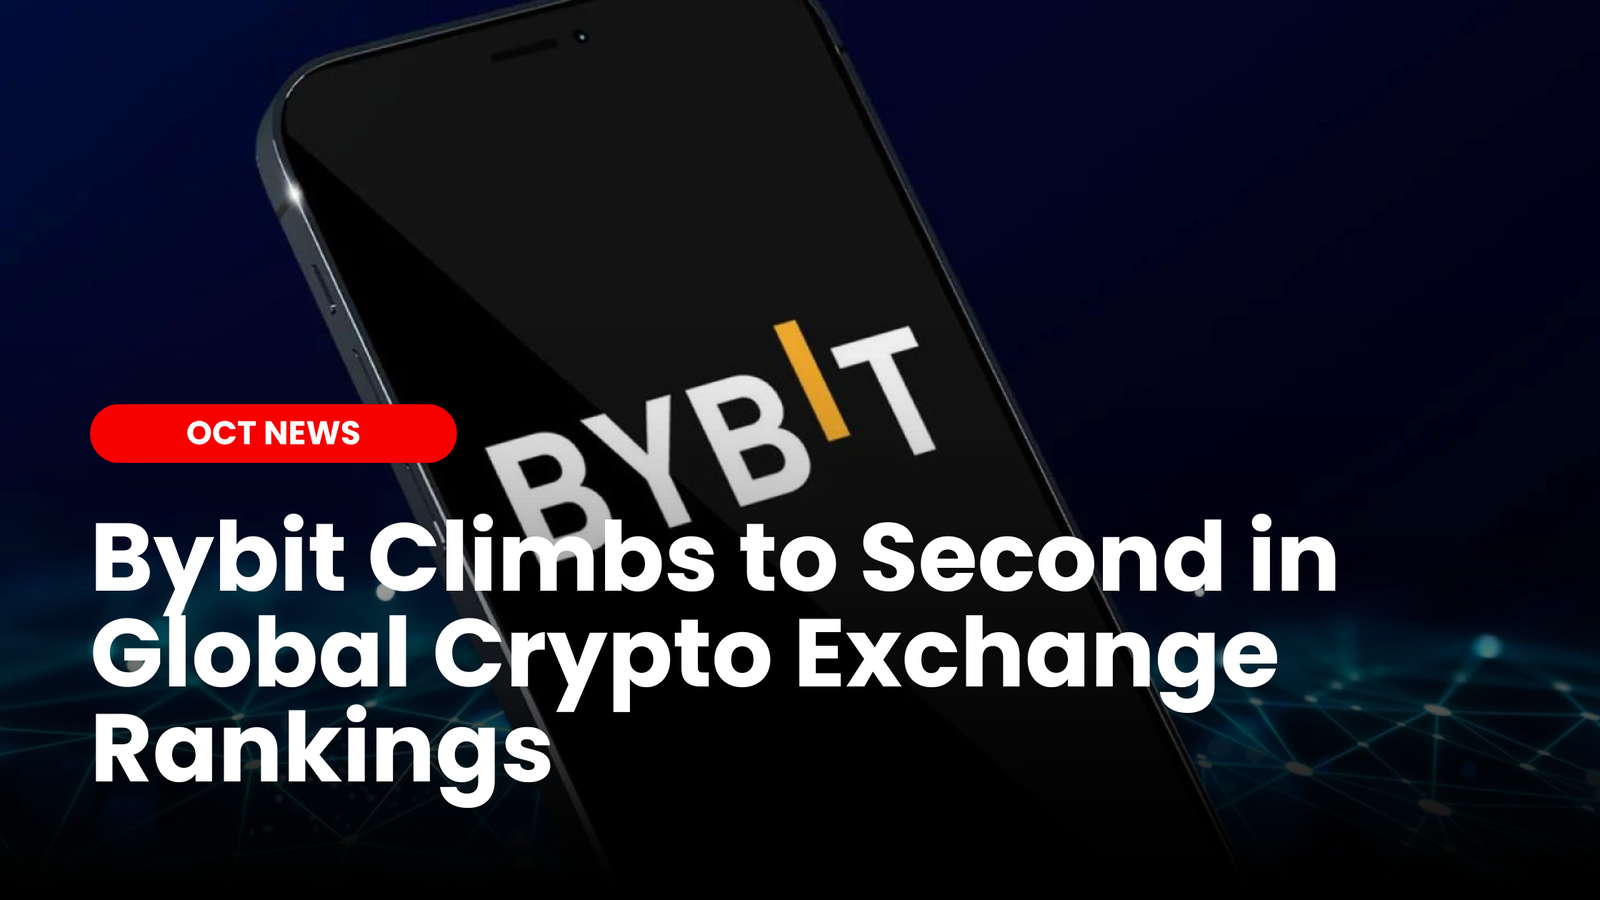 Bybit Climbs to Second in Global Crypto Exchange Rankings image